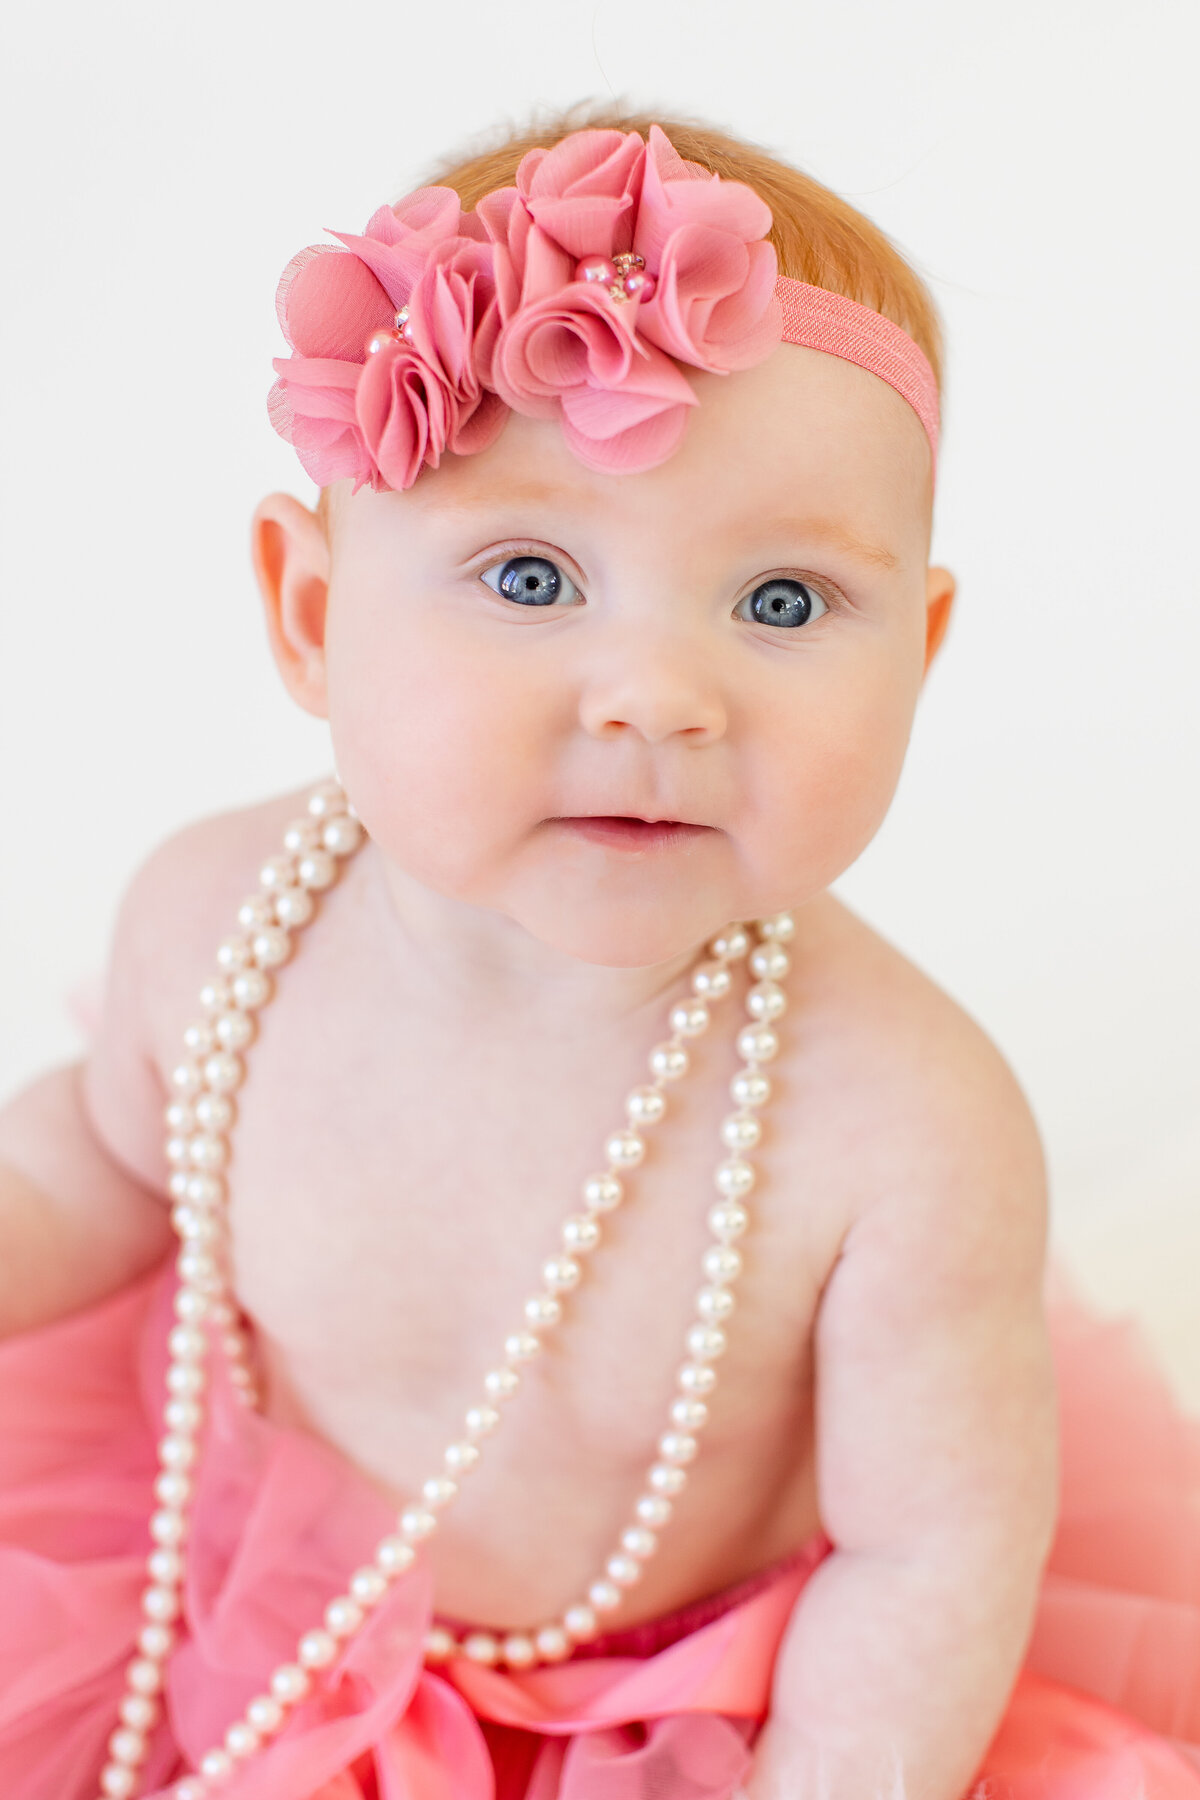 Baby girl in pink tutu and pearls smiling